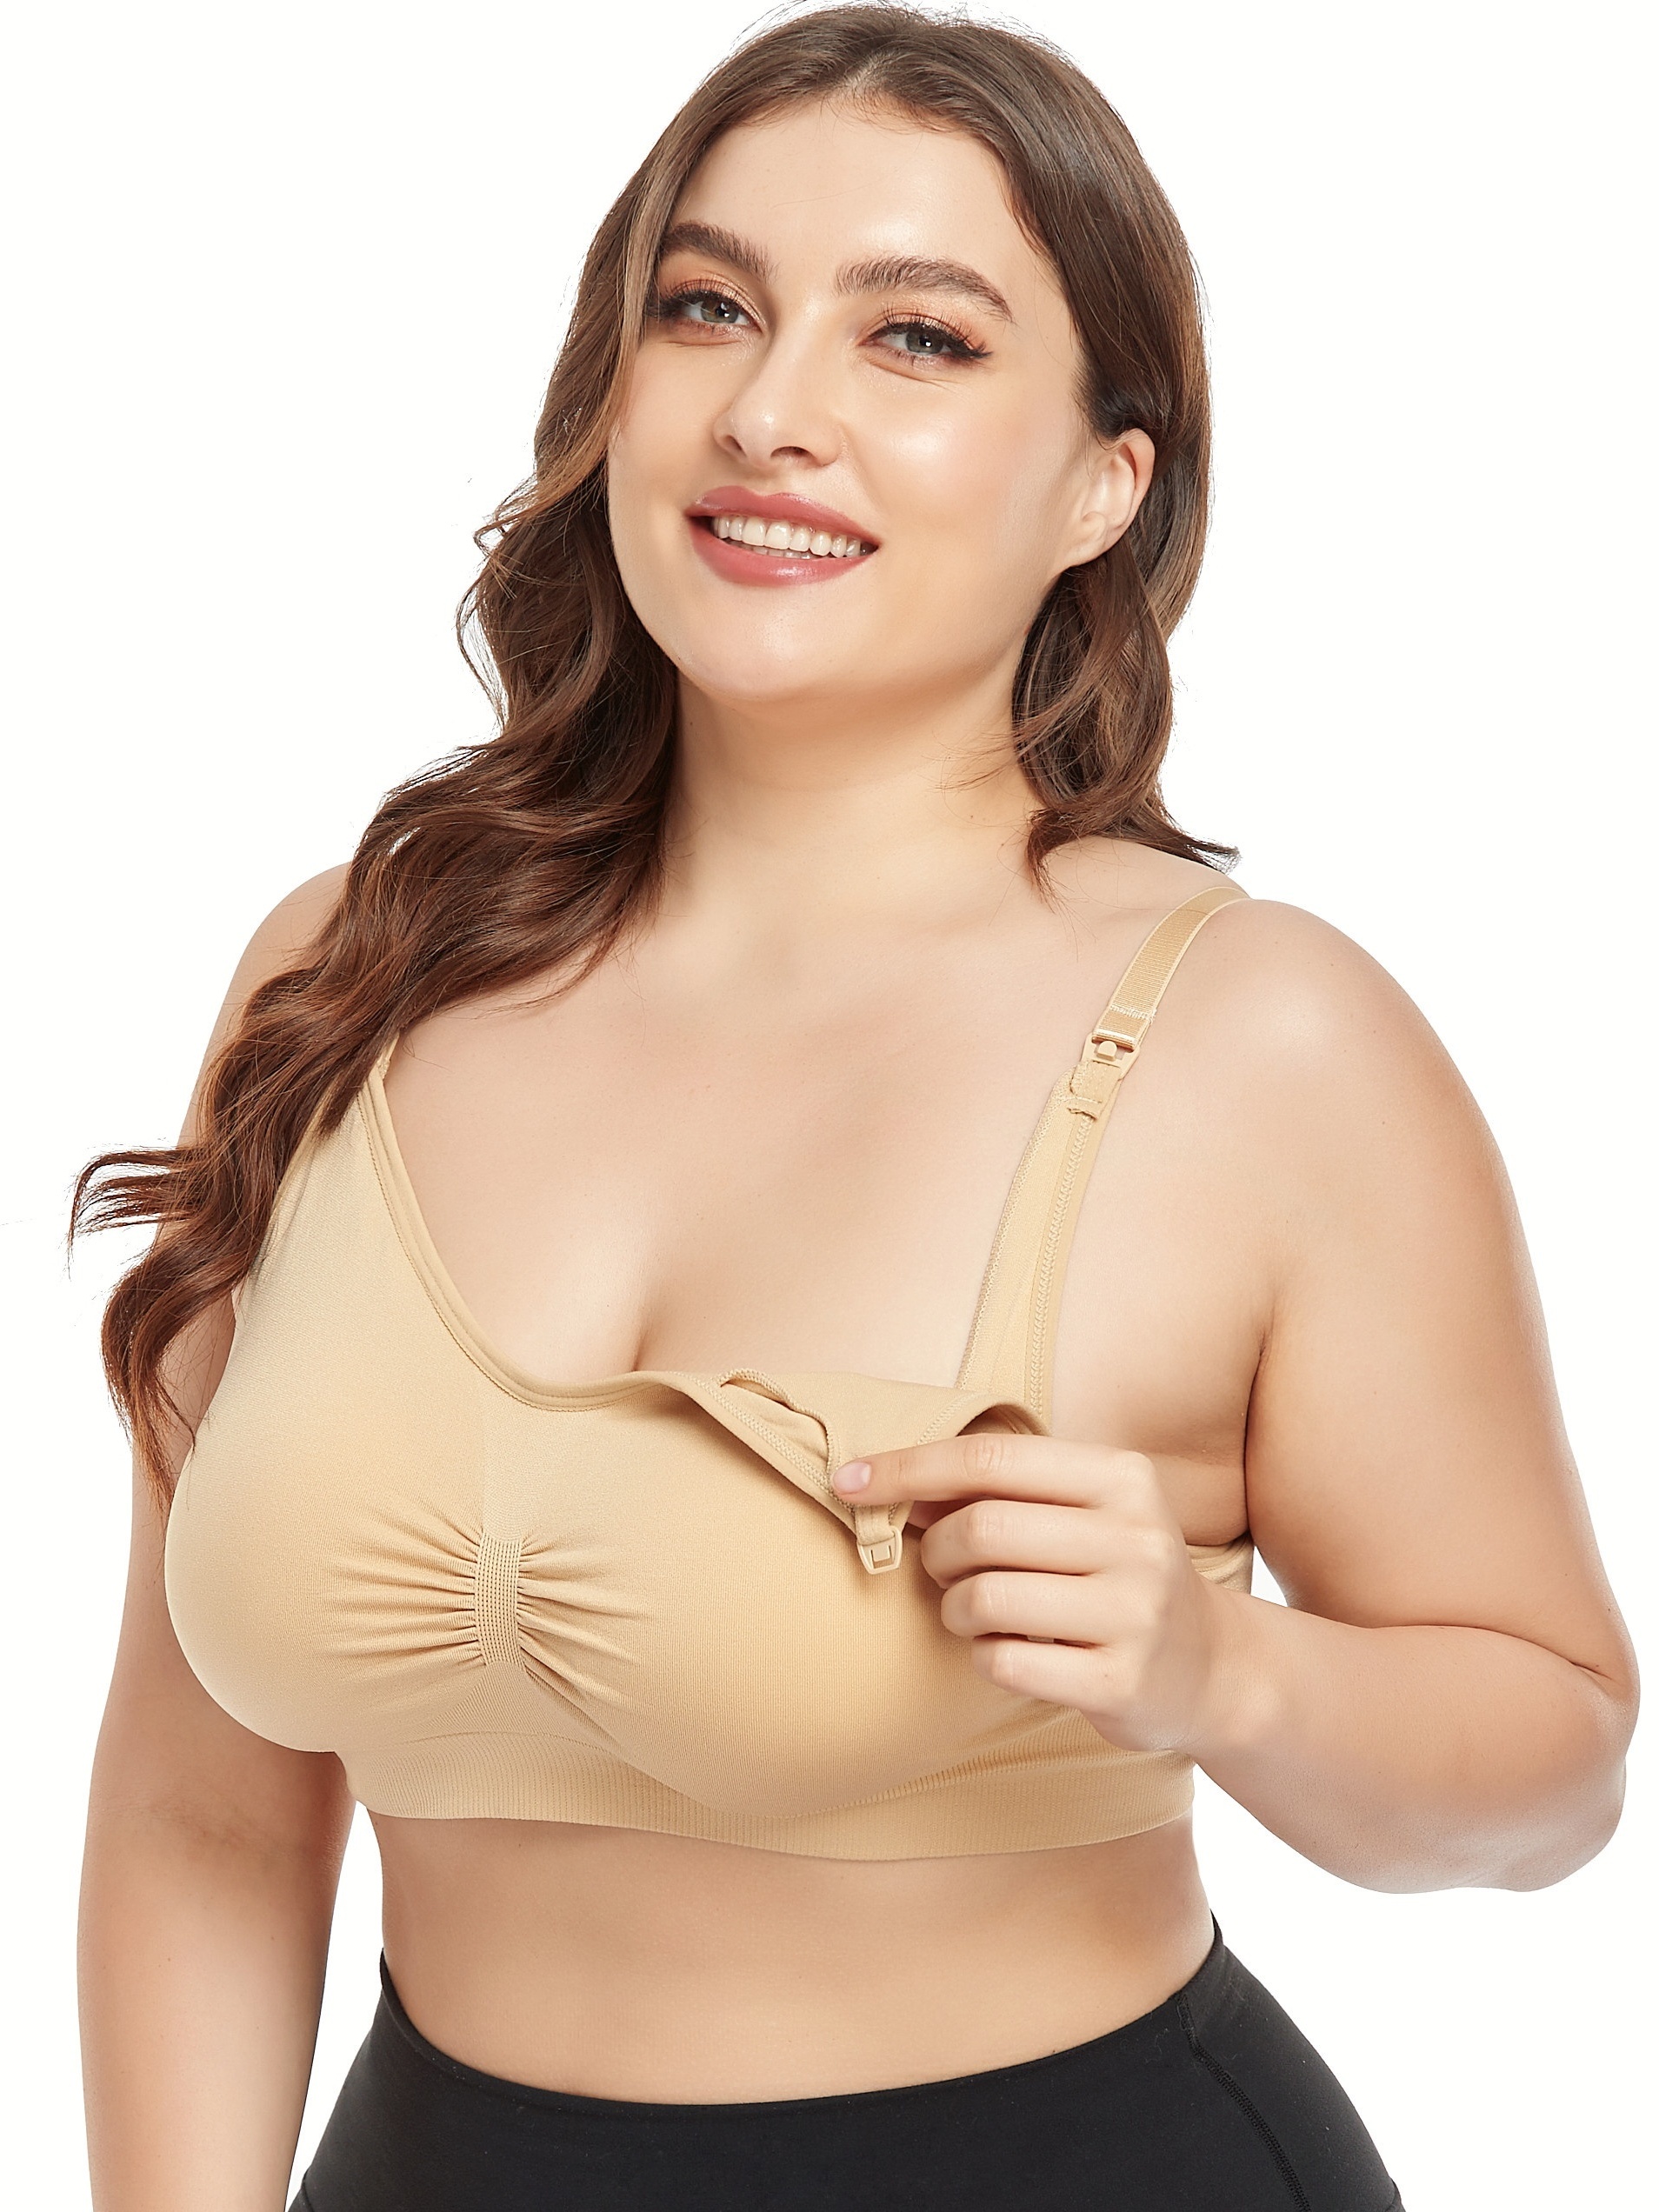 Breathable Plus Size Maternity Nursing Bra For Breastfeeding And